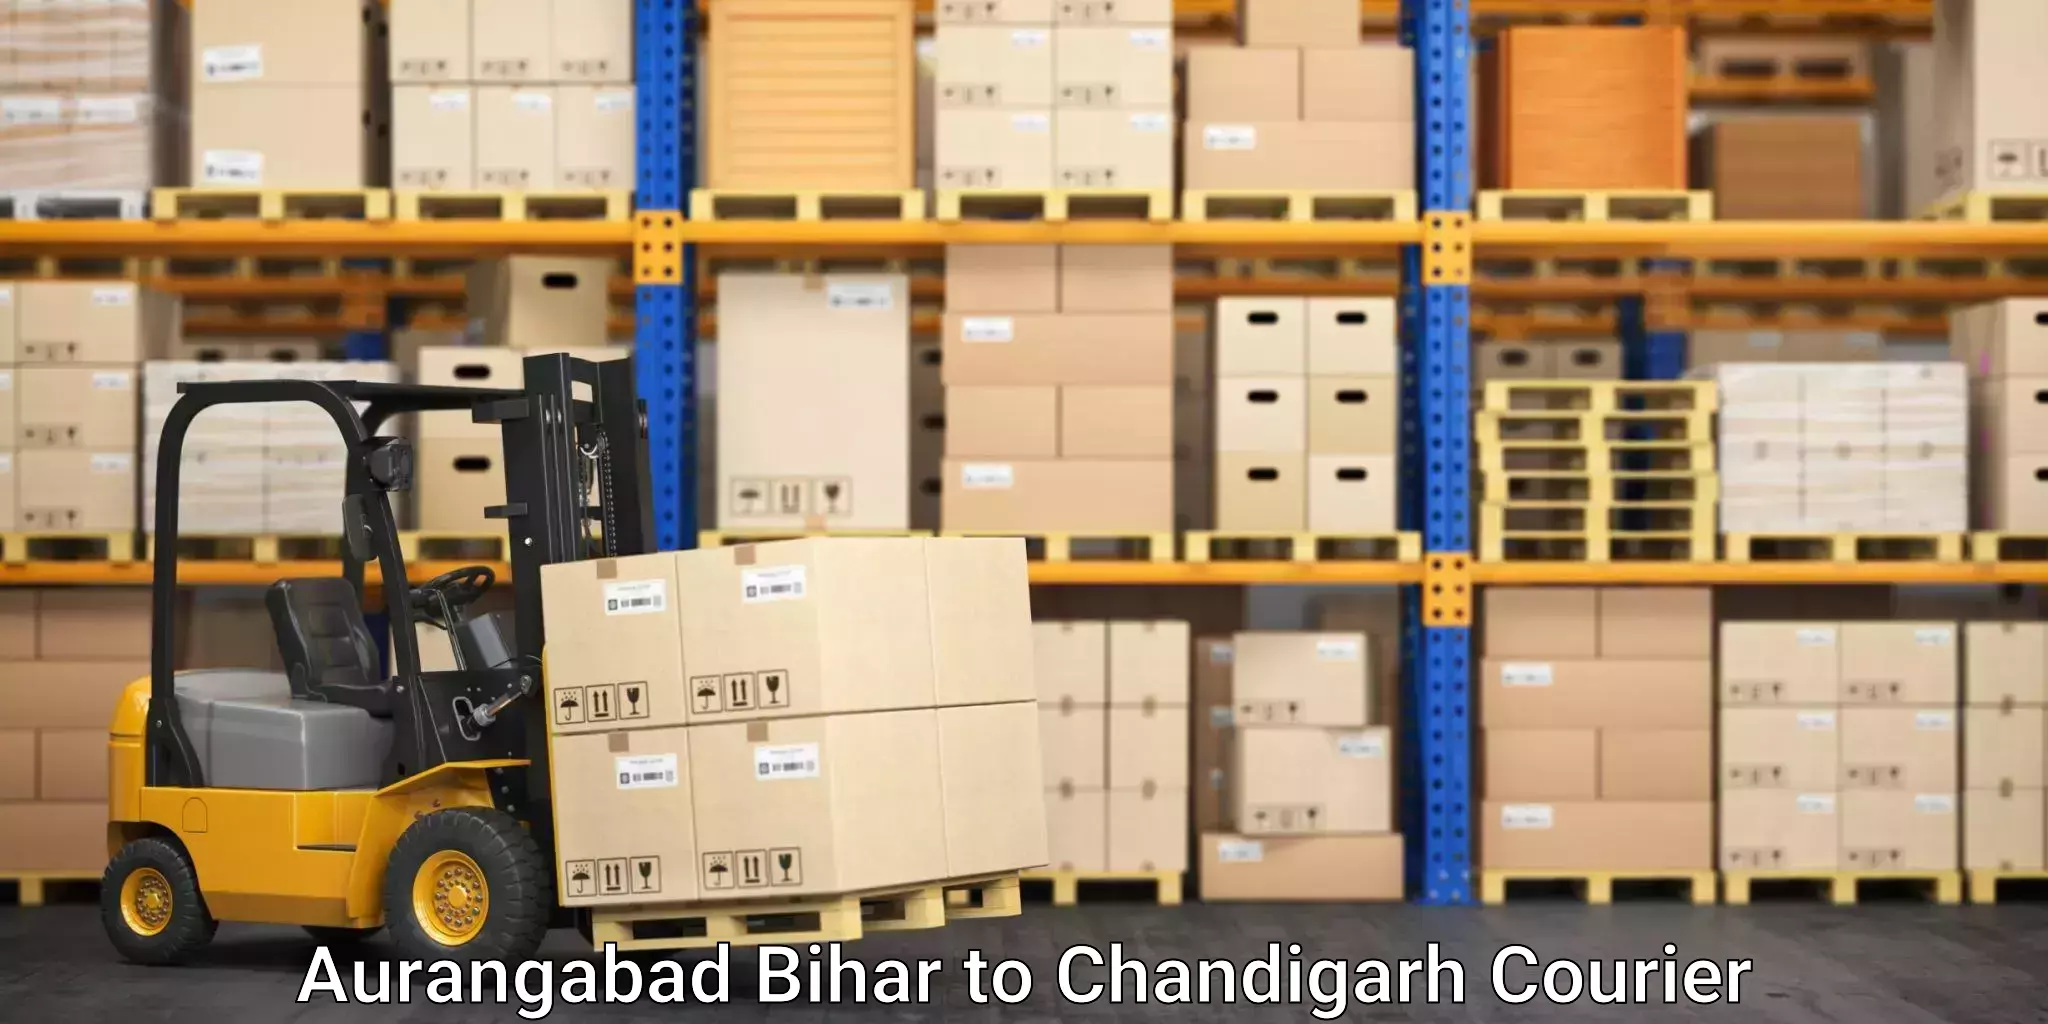 Long-distance moving services in Aurangabad Bihar to Chandigarh